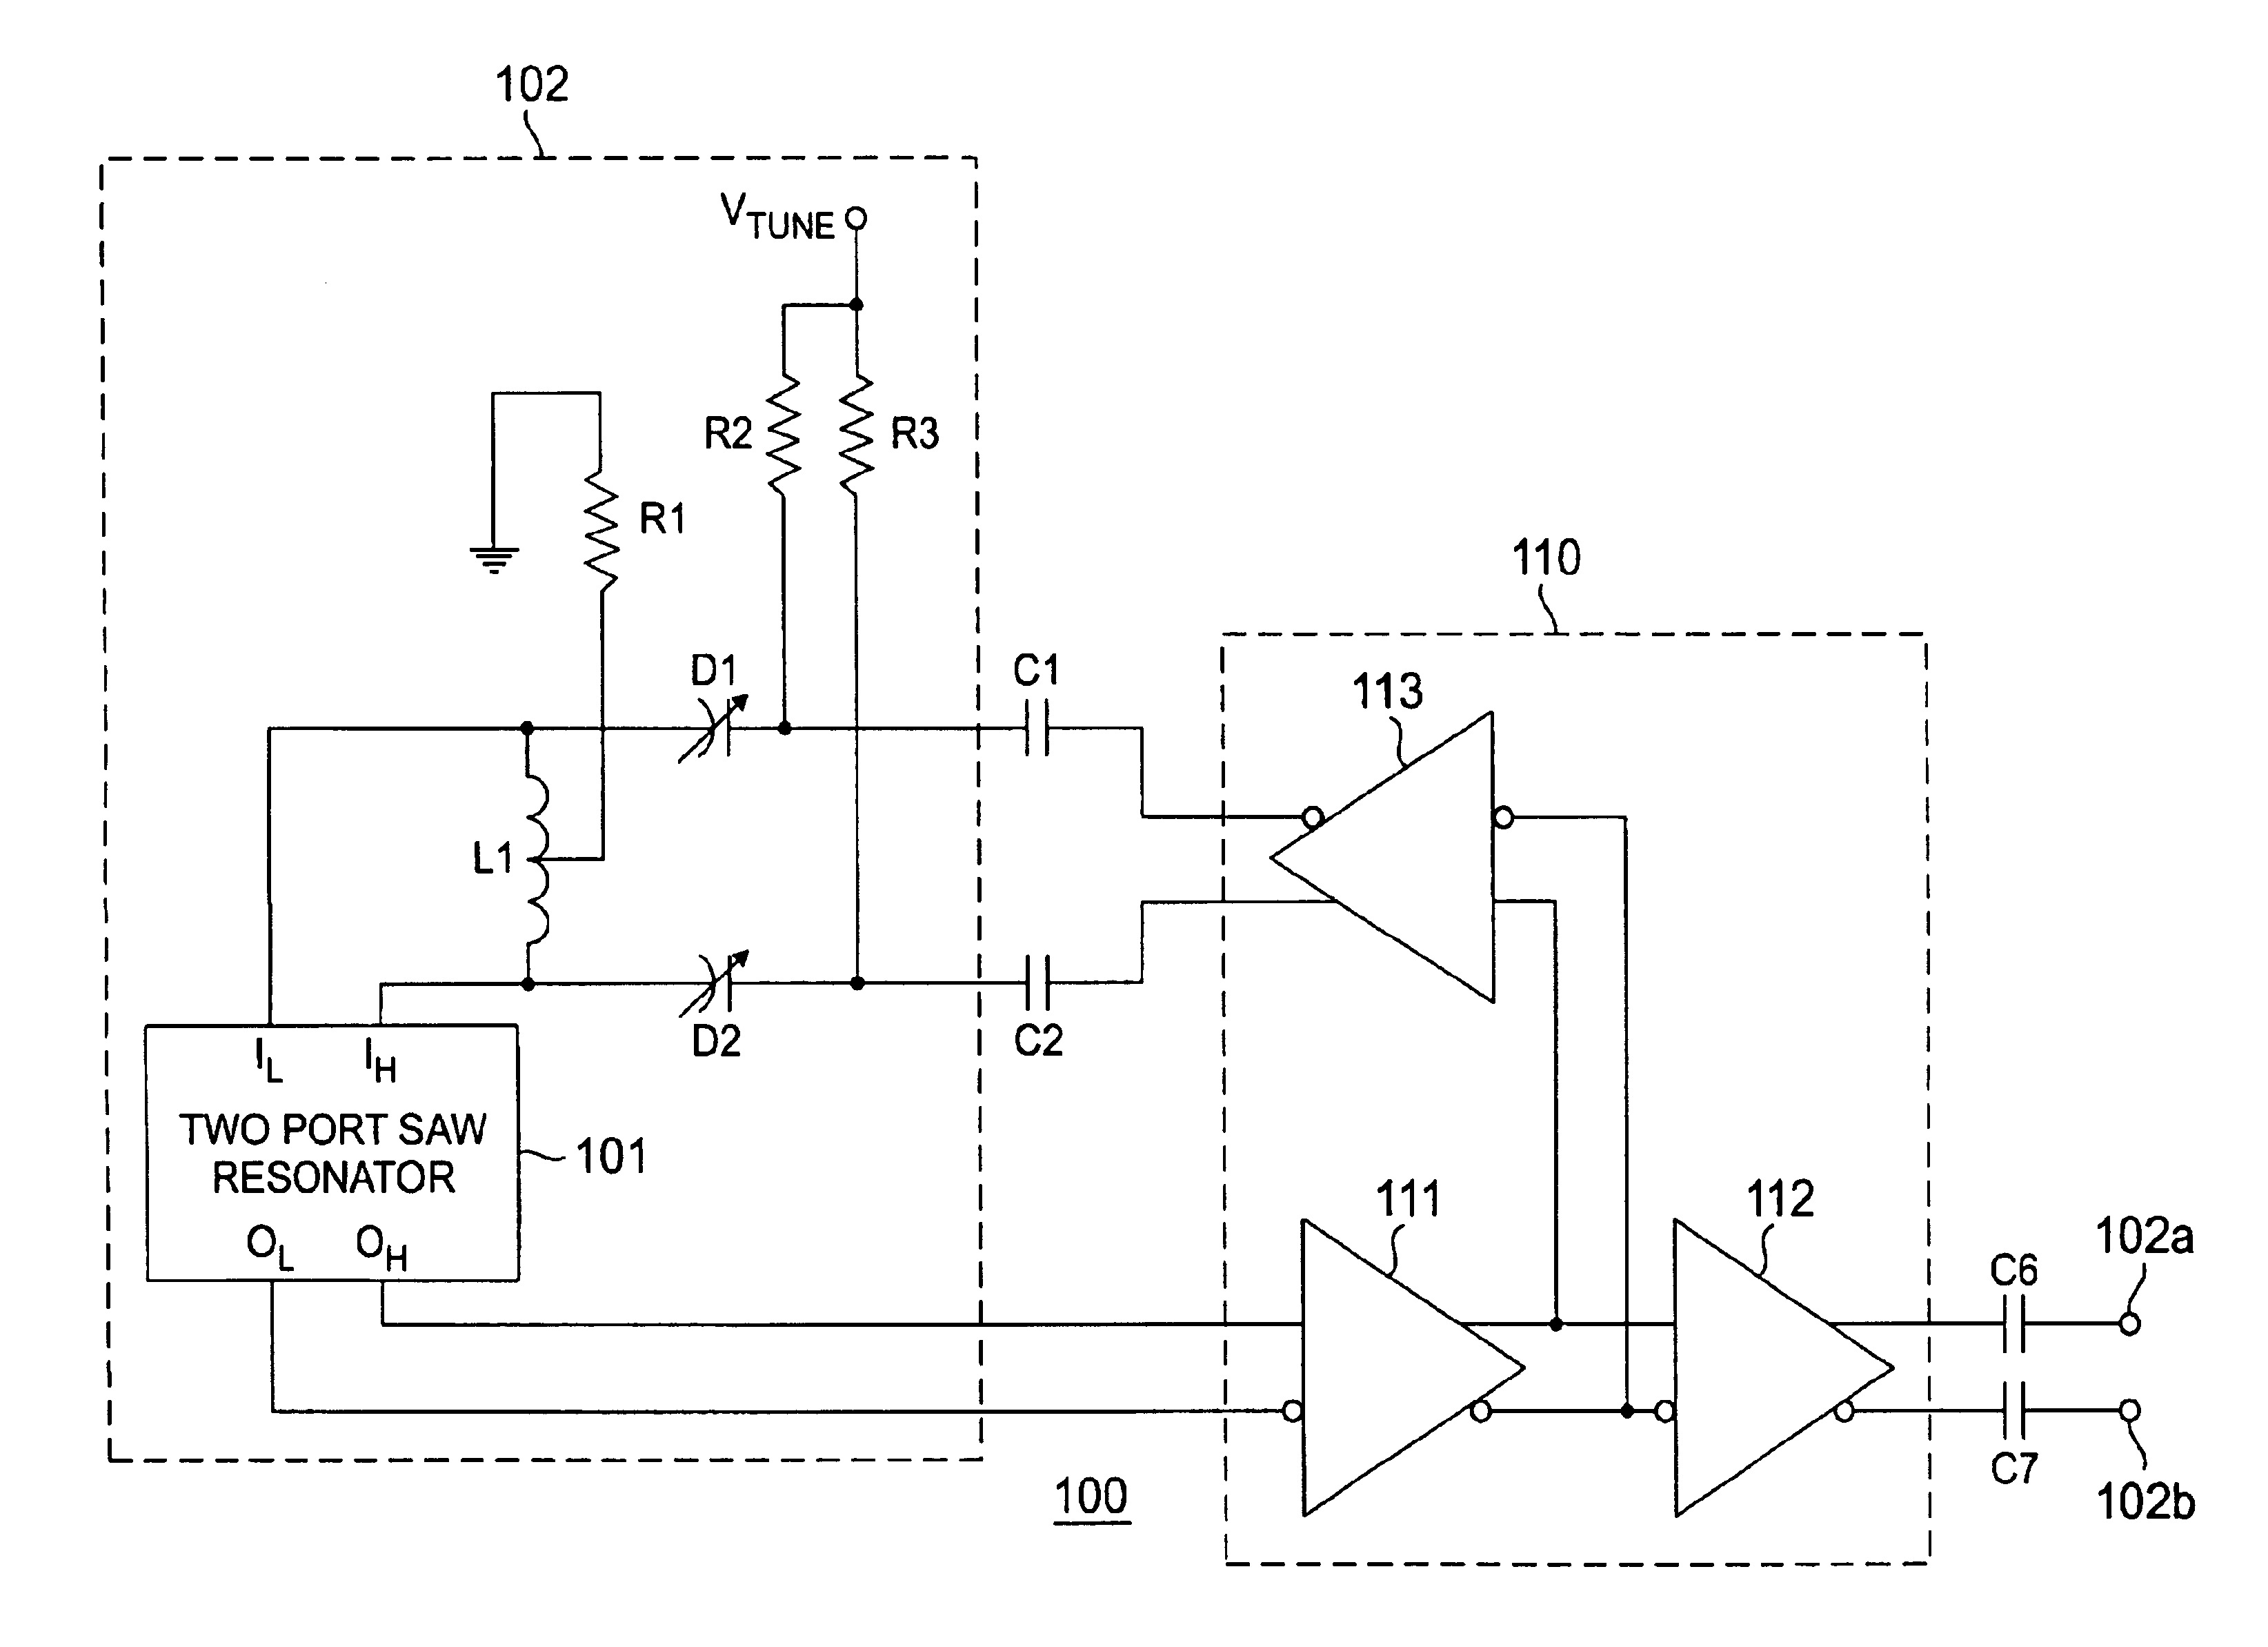 Noise resistant low phase noise, frequency tracking oscillators and methods of operating the same